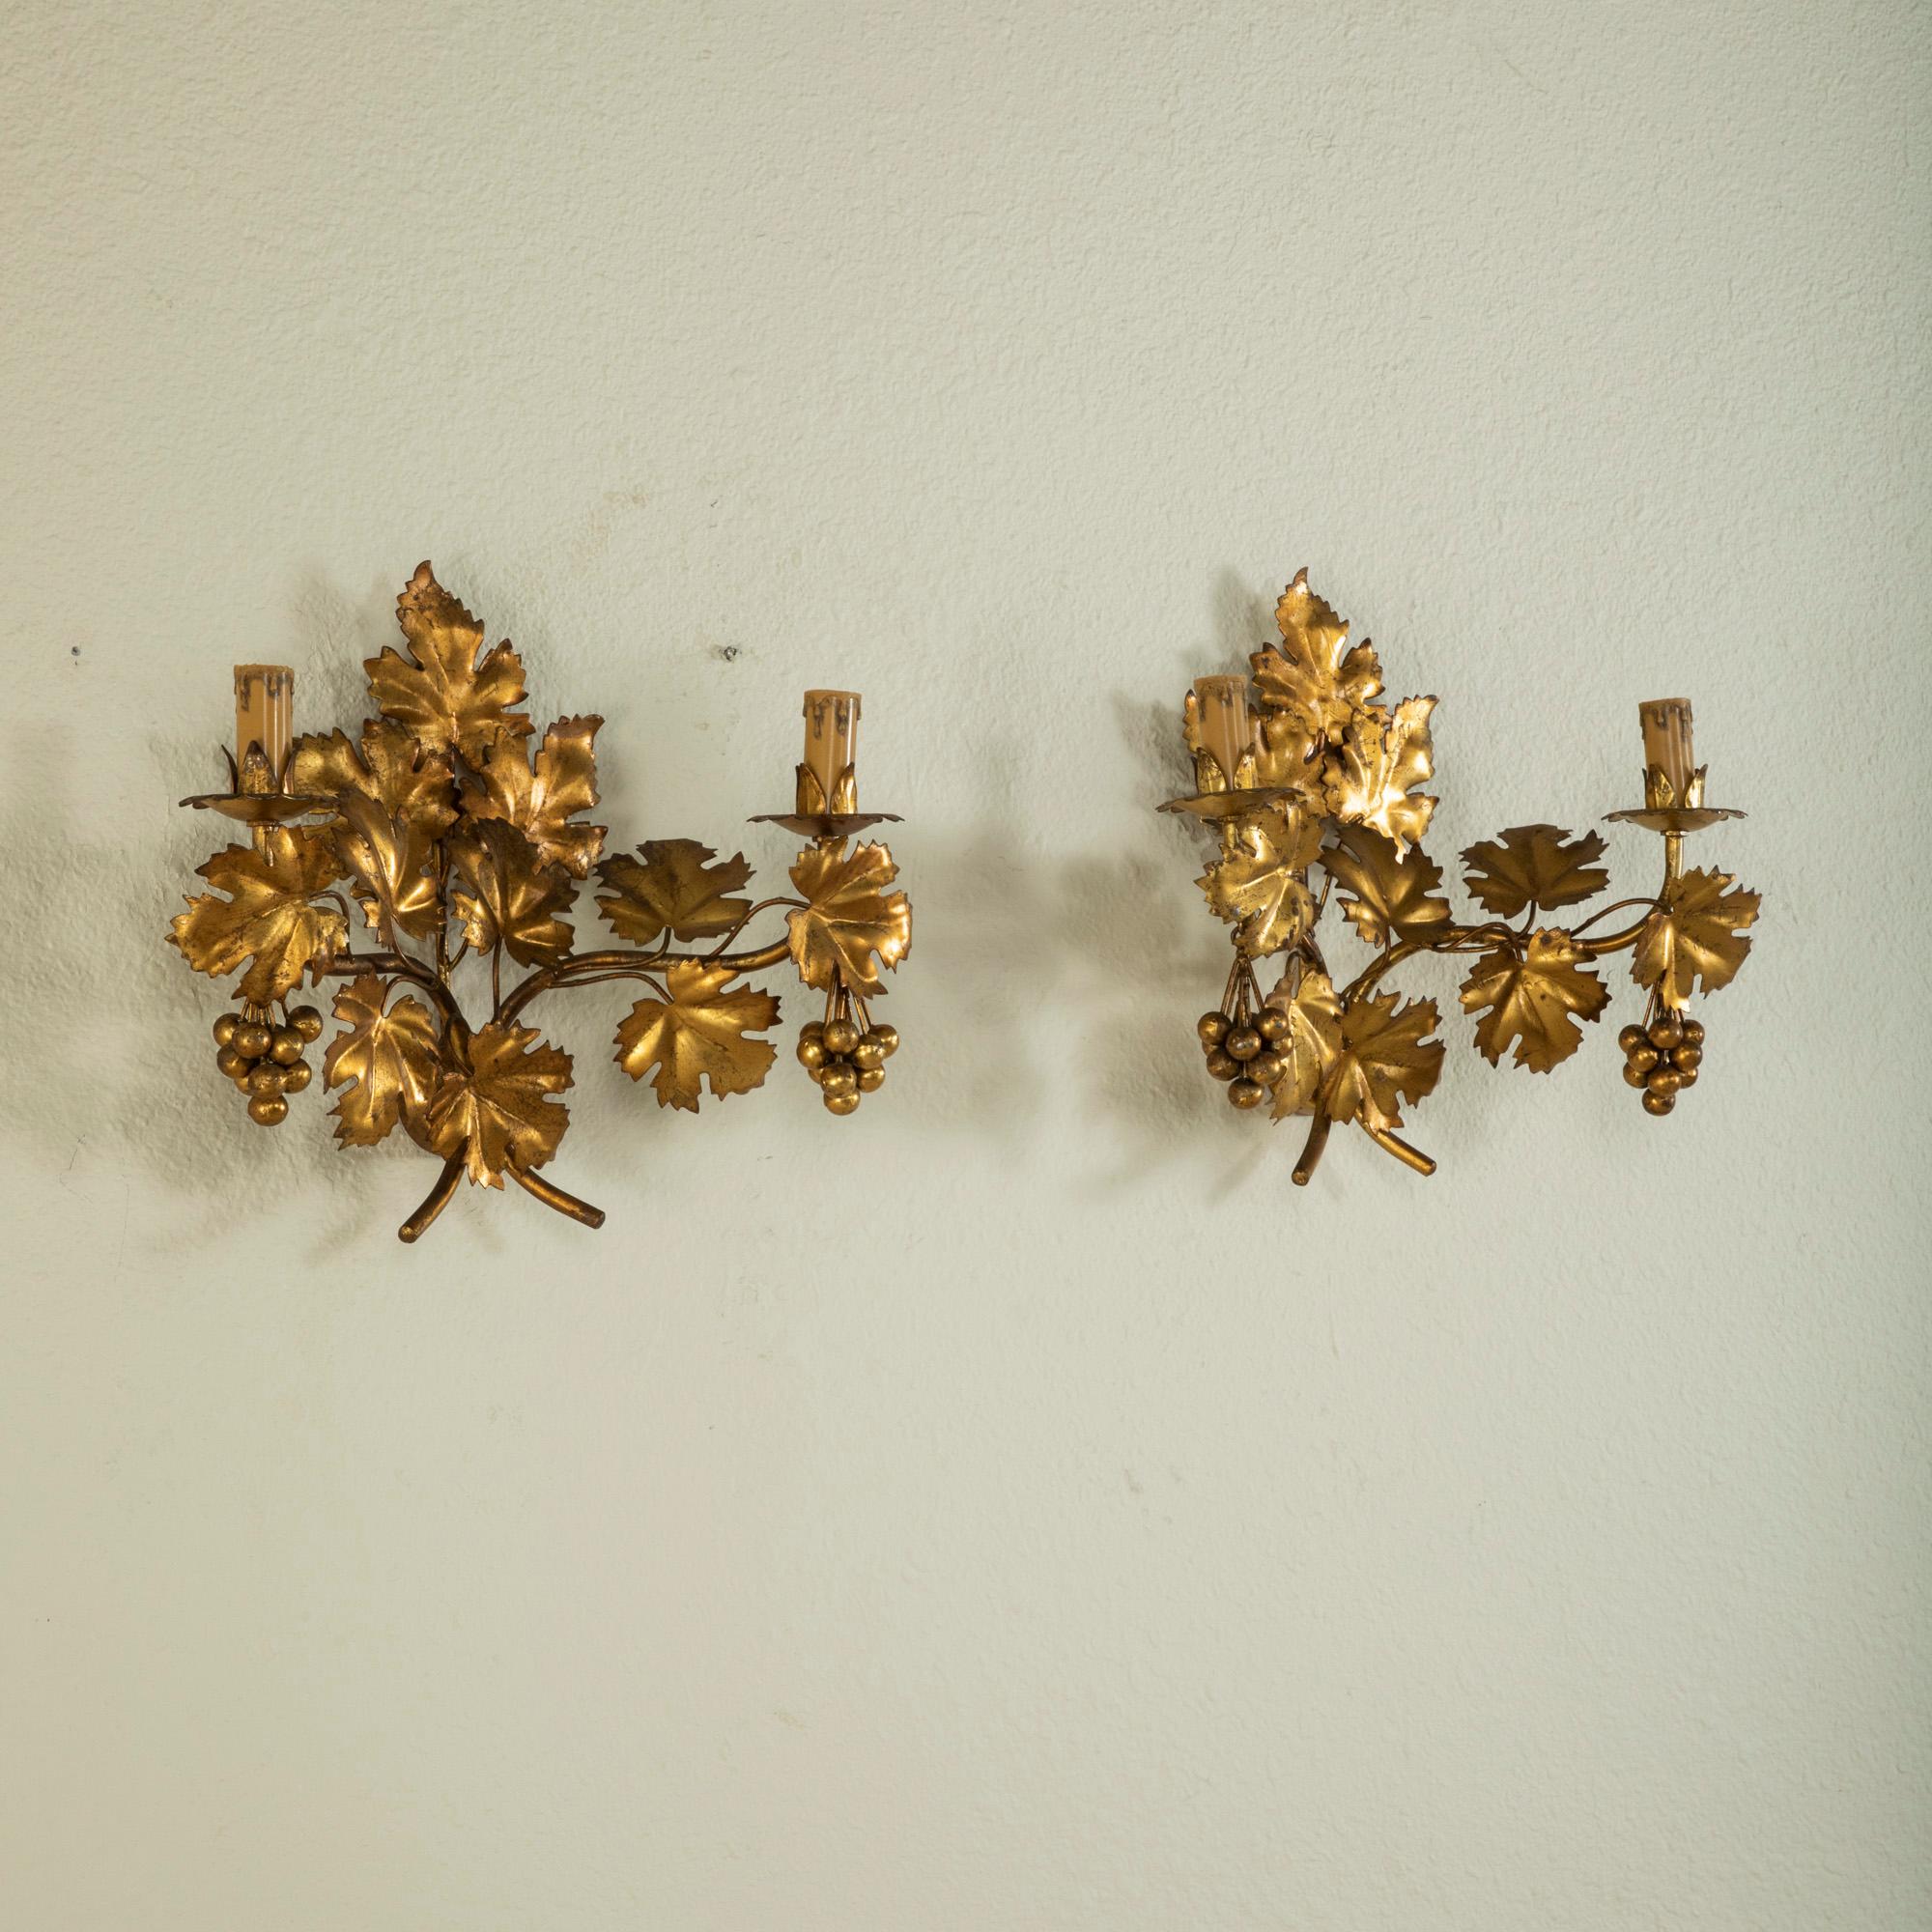 Pair of Mid-20th Century Italian Gilt Metal Sconces with Grape Leaves For Sale 1